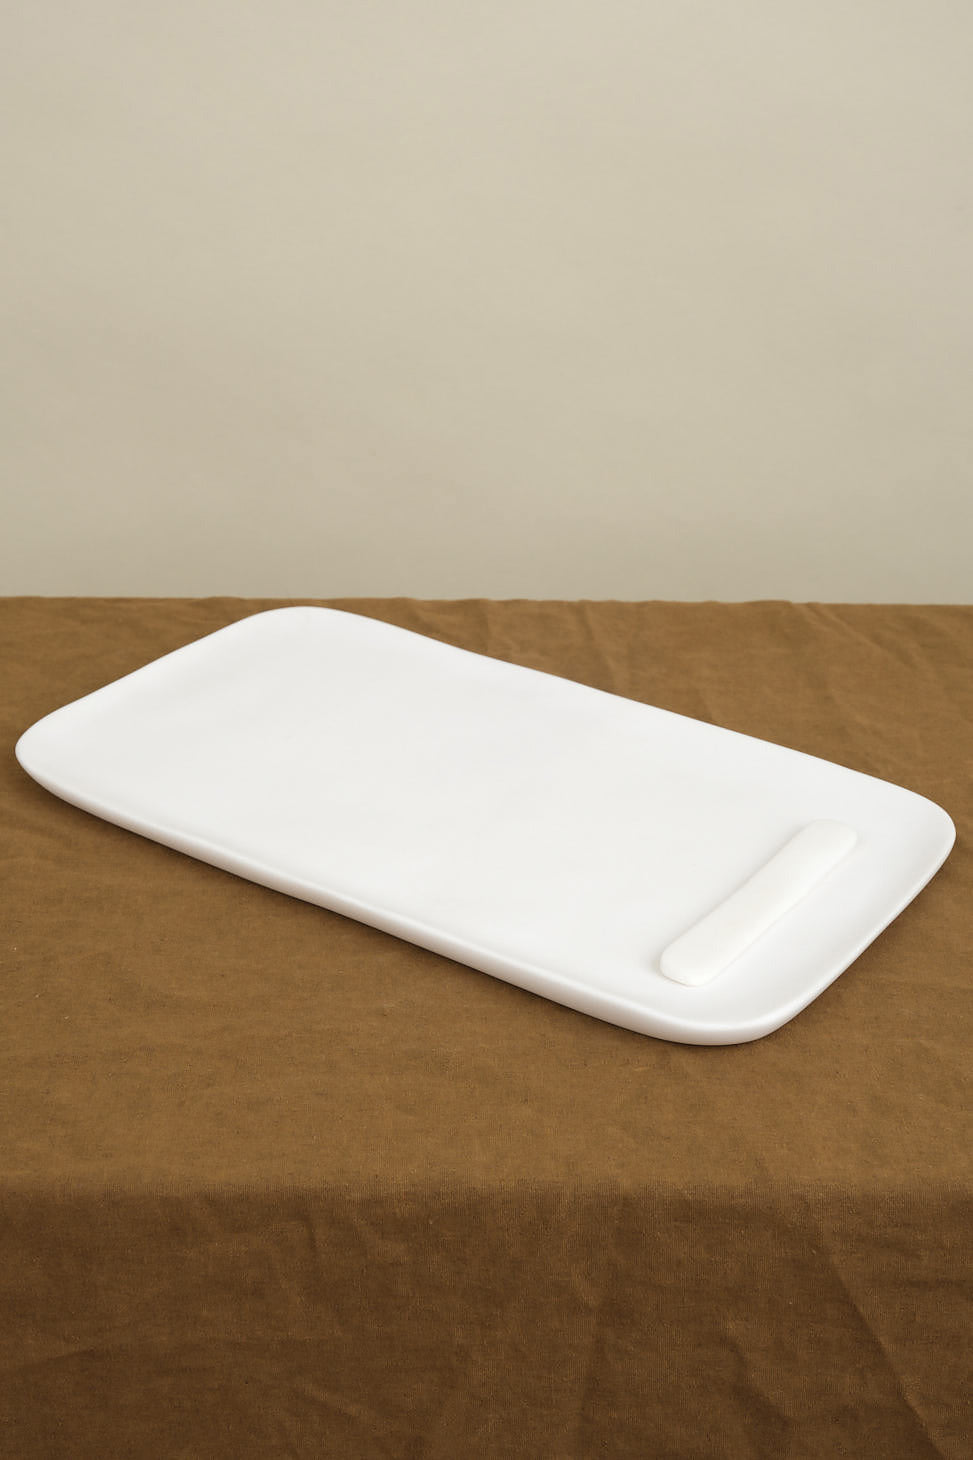 Large Serving Board with Cheese Spreader on table